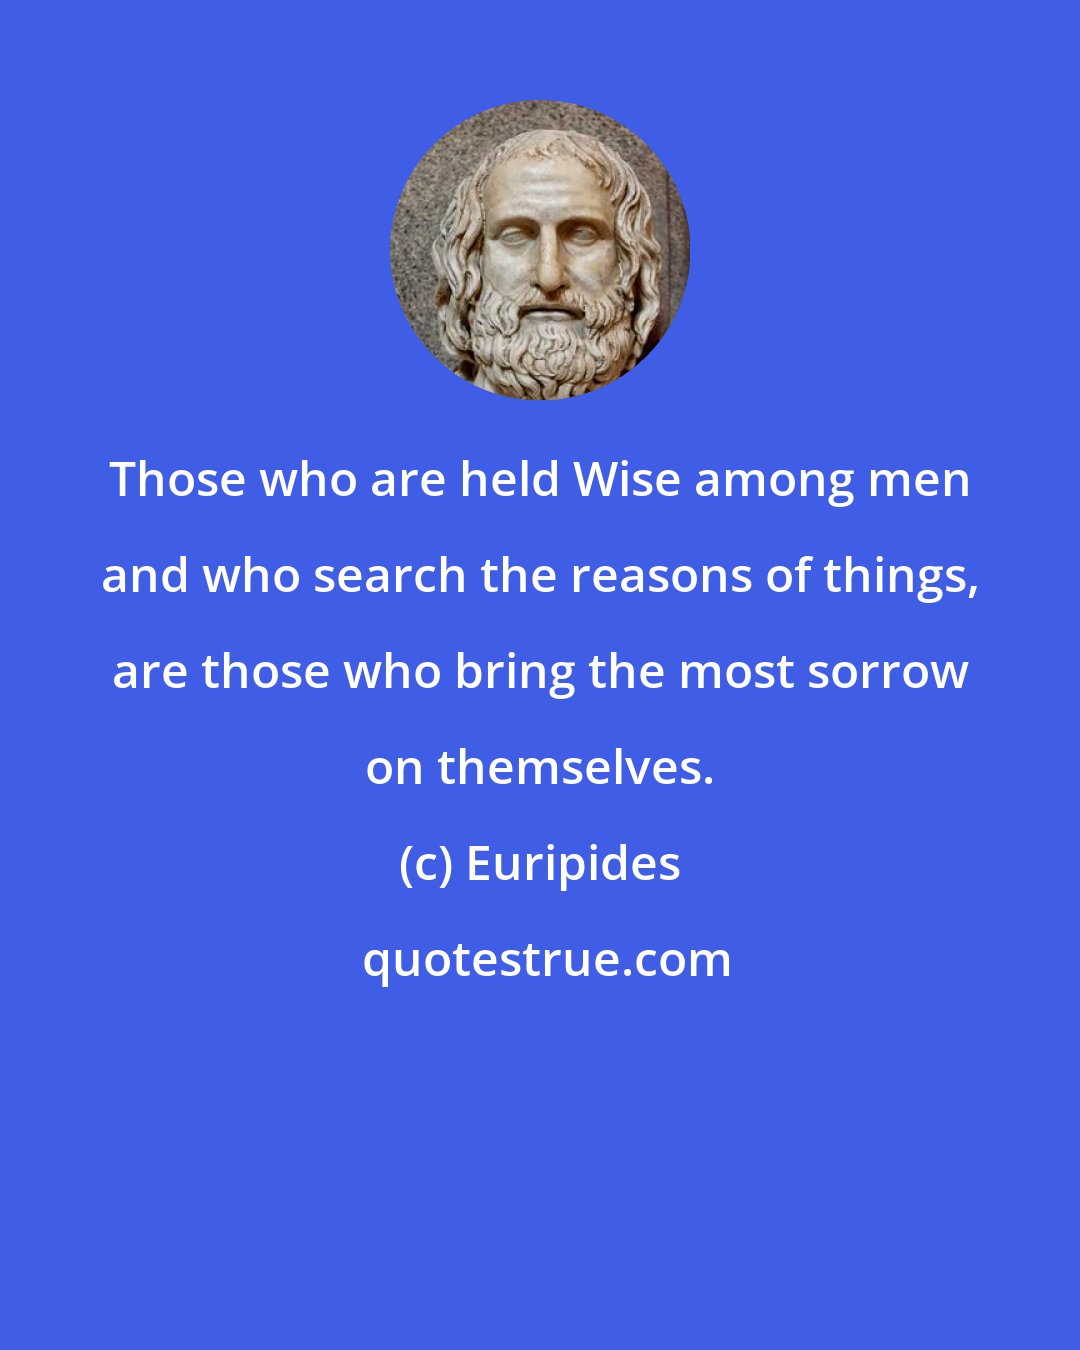 Euripides: Those who are held Wise among men and who search the reasons of things, are those who bring the most sorrow on themselves.